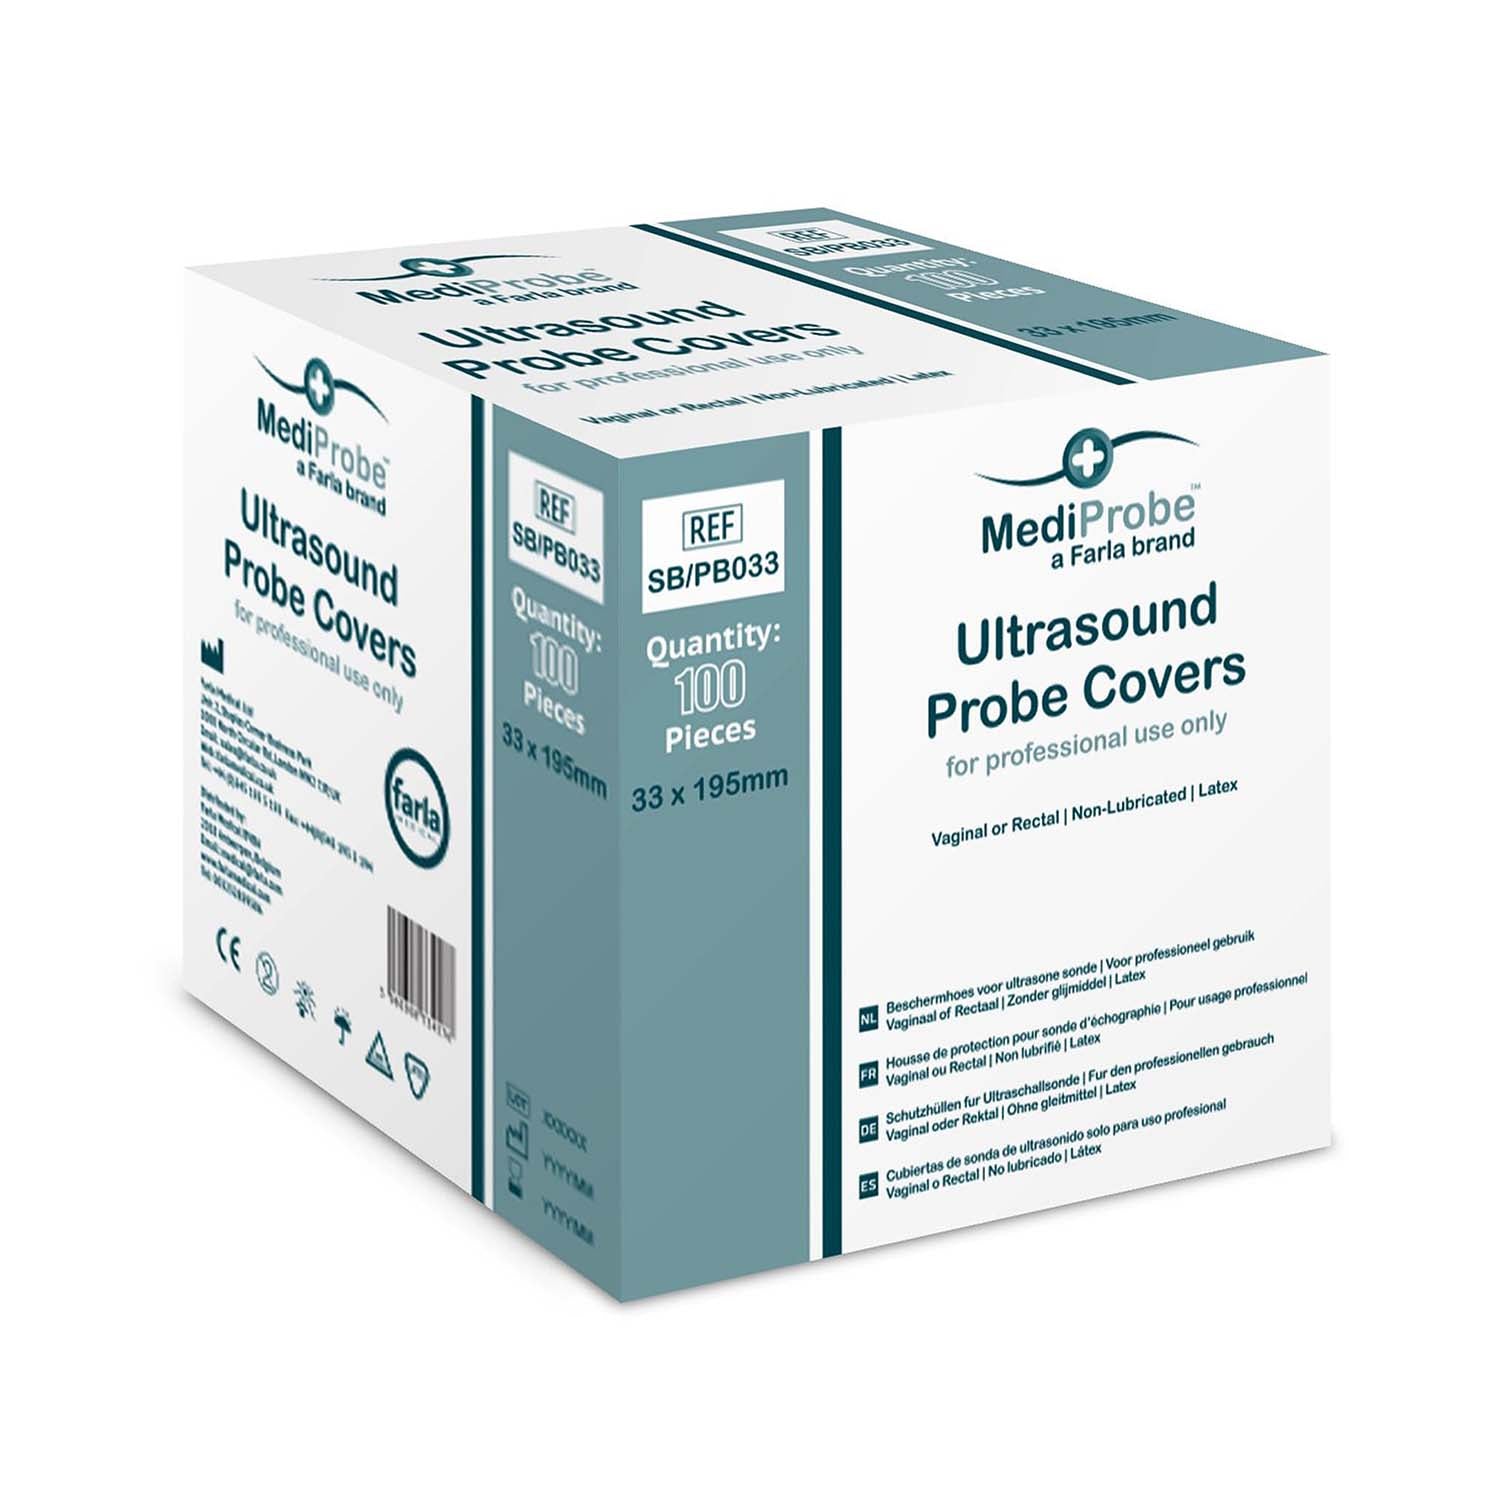 MediProbe Ultrasound Probe Covers | 35 x 195mm | Pack of 100